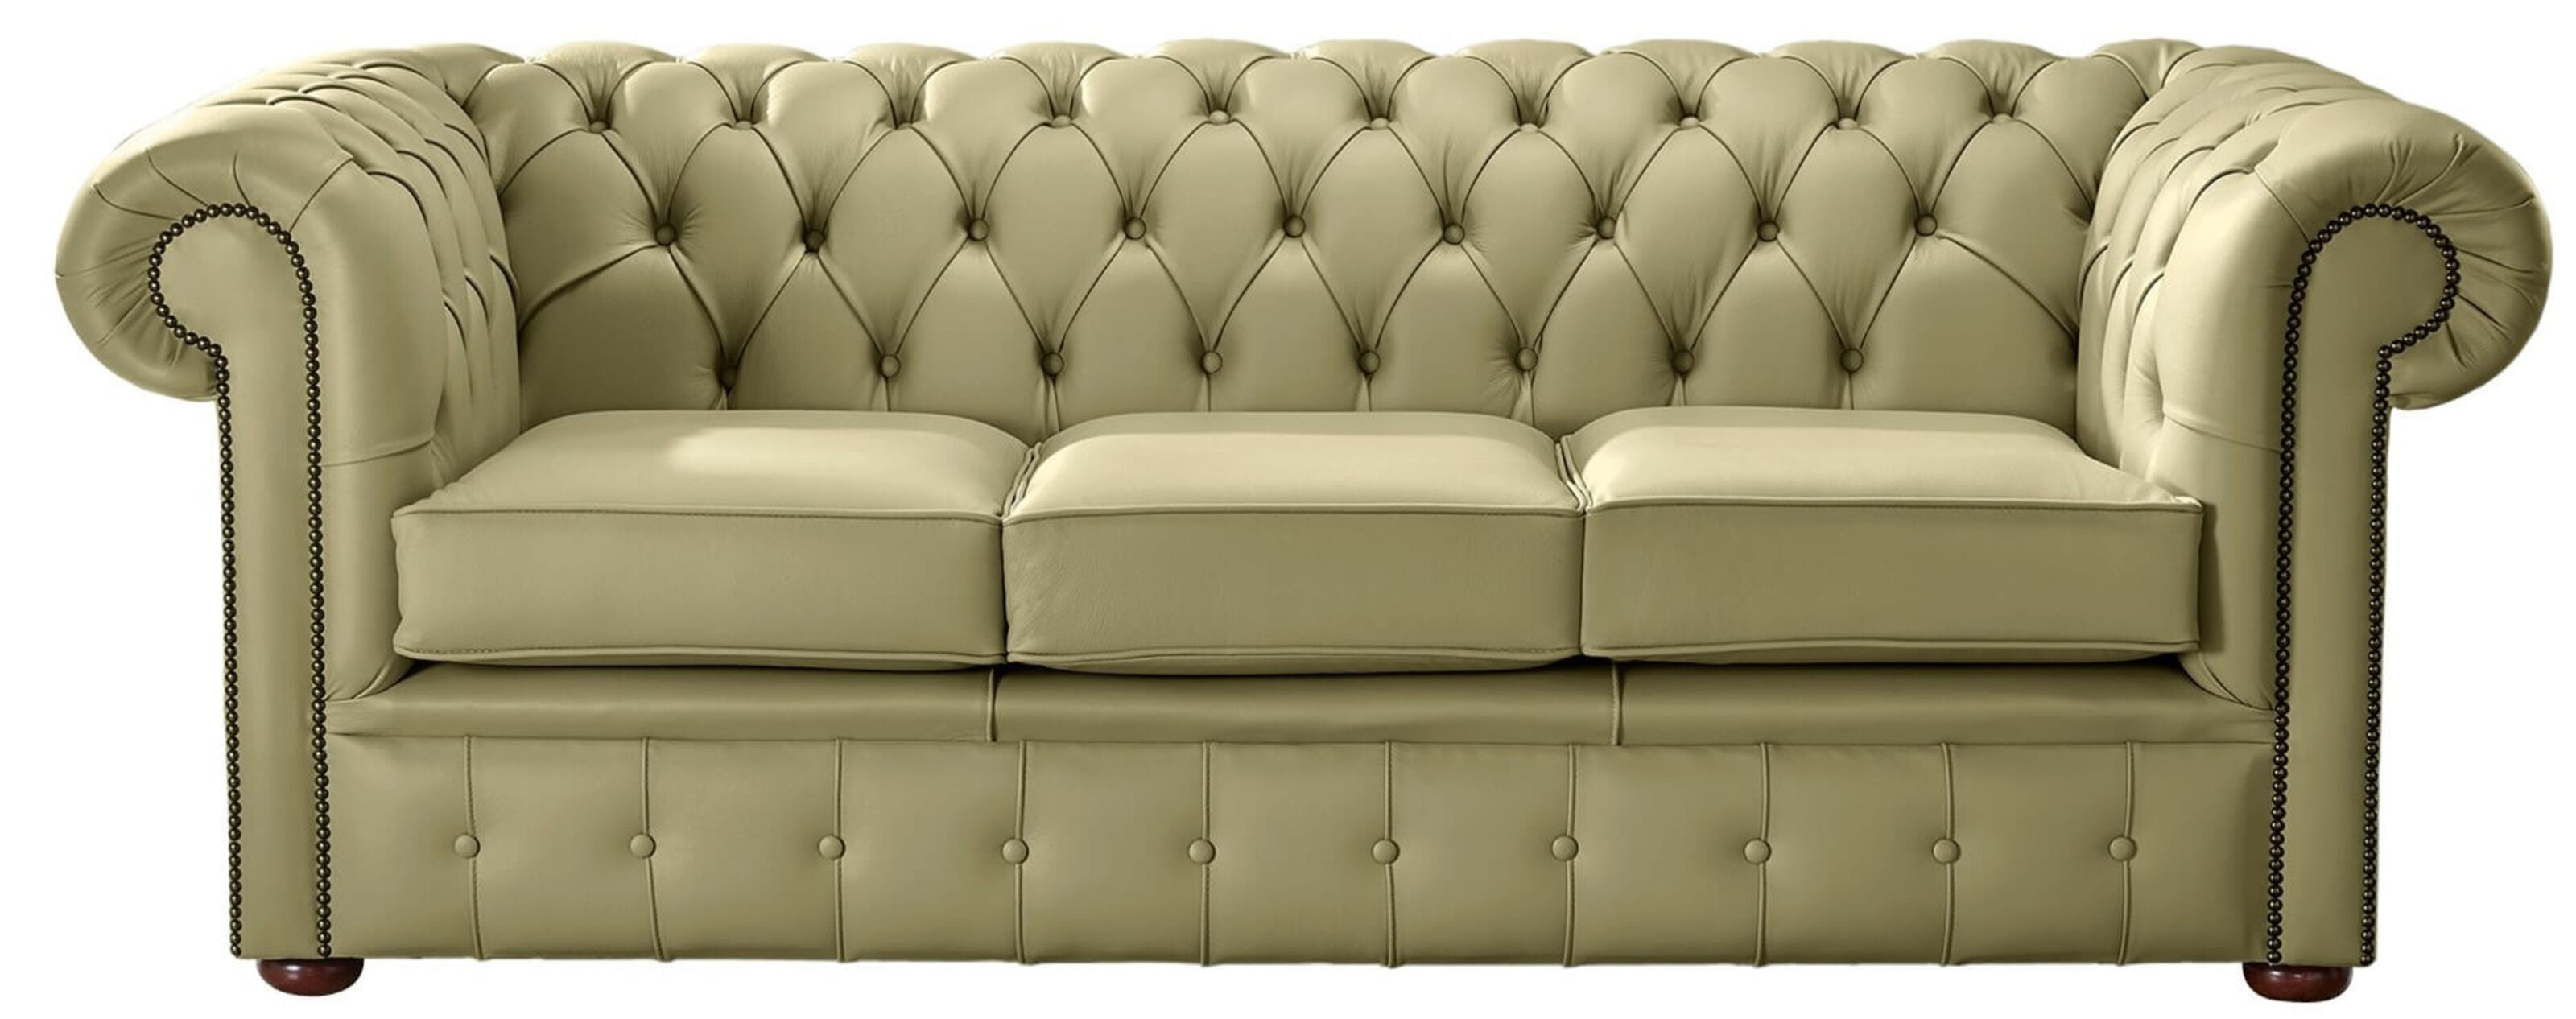 Last Chance Luxury Chesterfield Sofa Clearance Deals  %Post Title